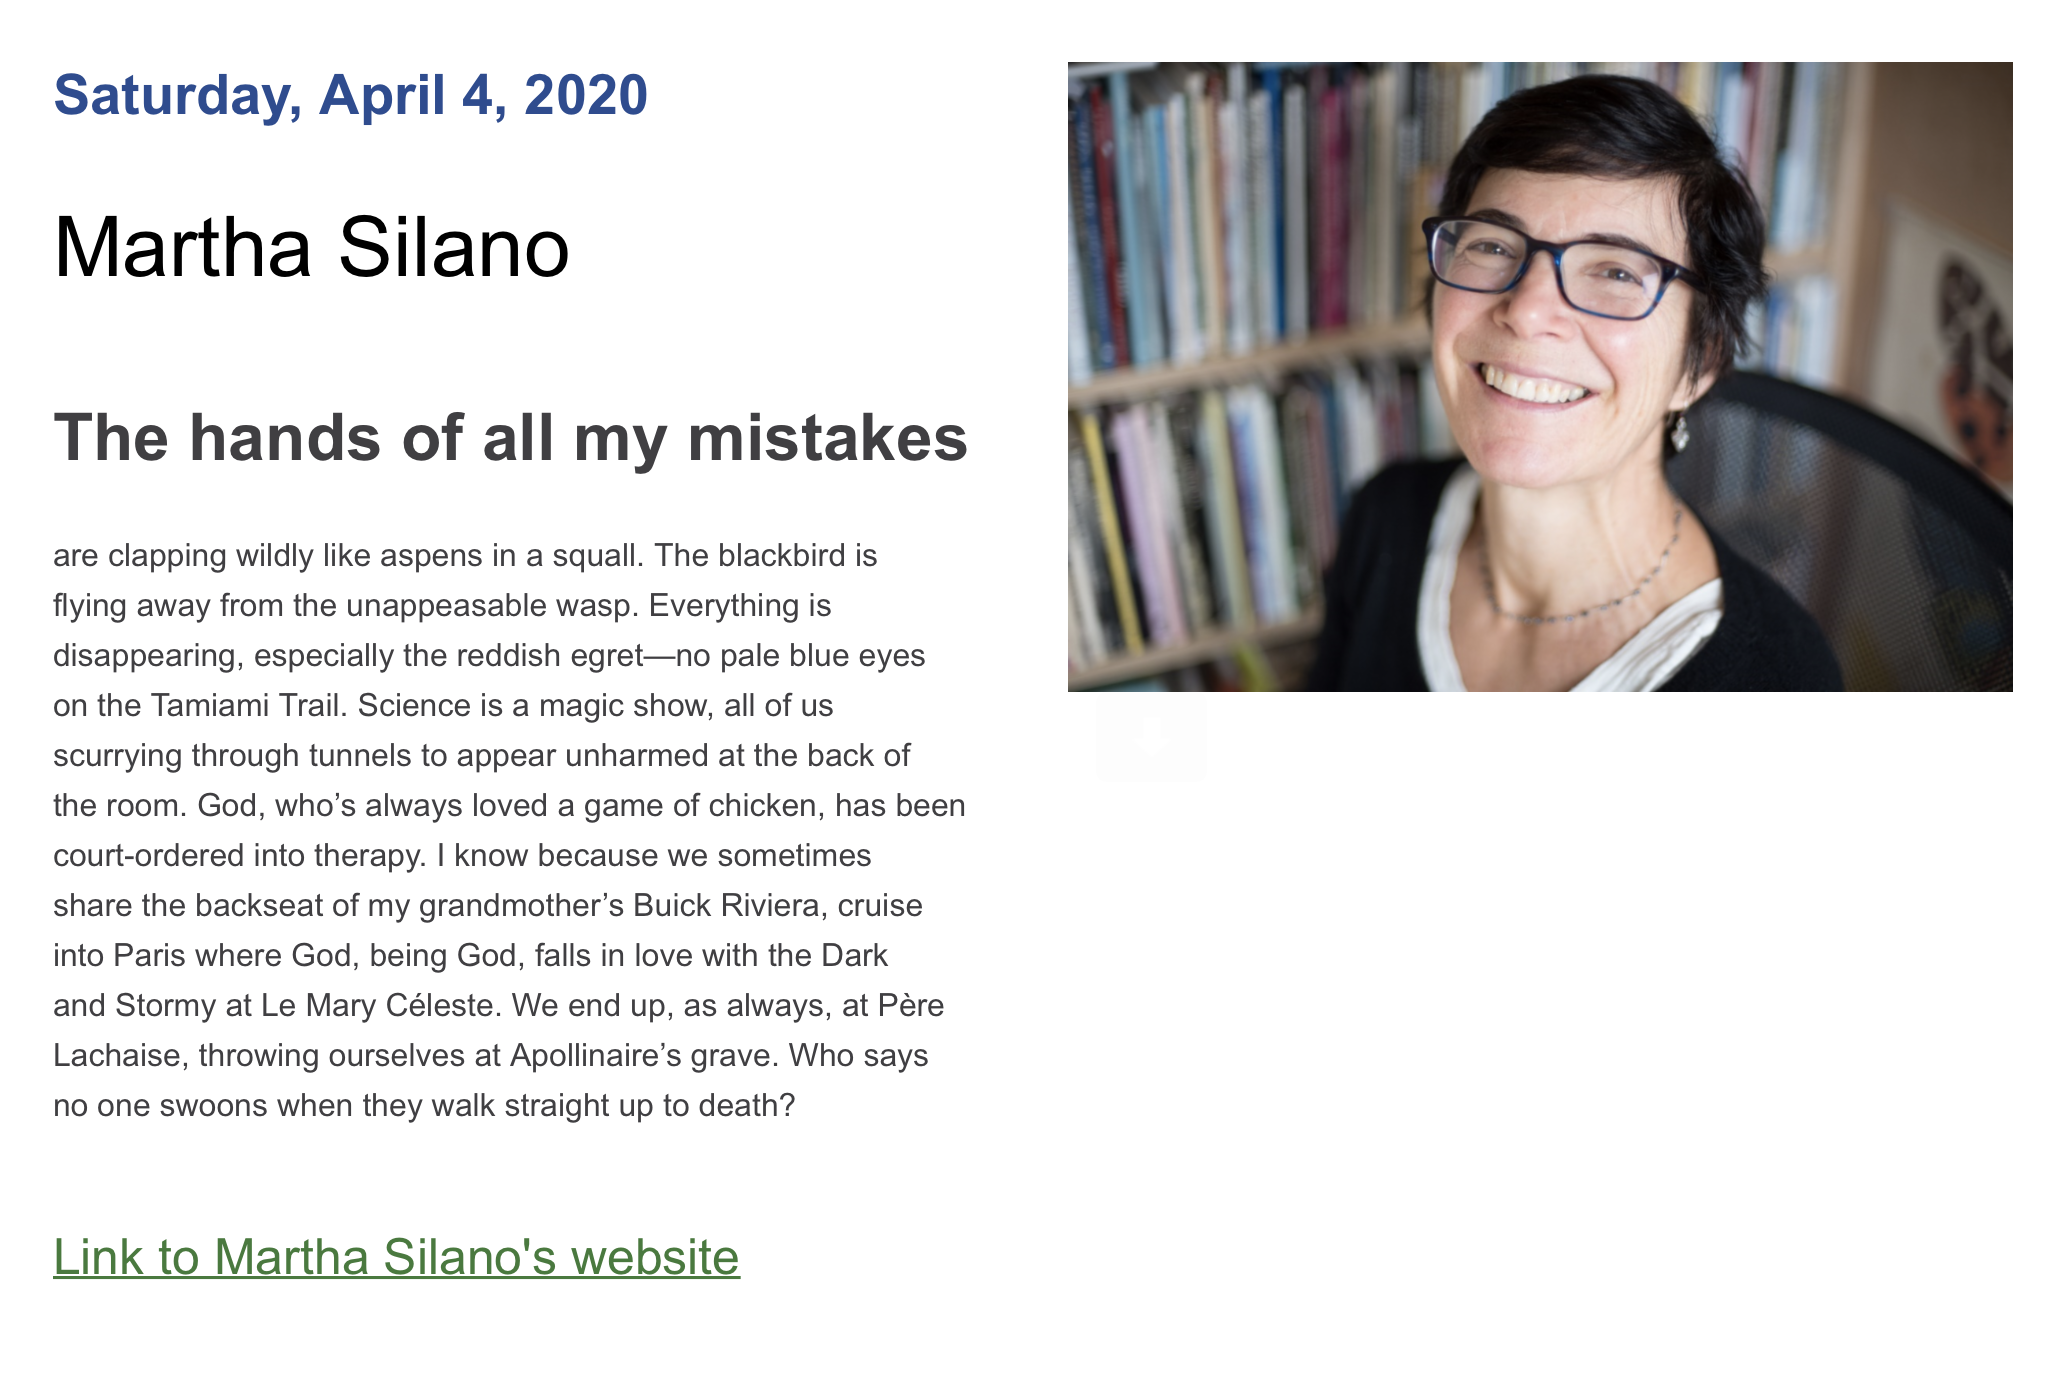 Silano - the hands of all my mistakes